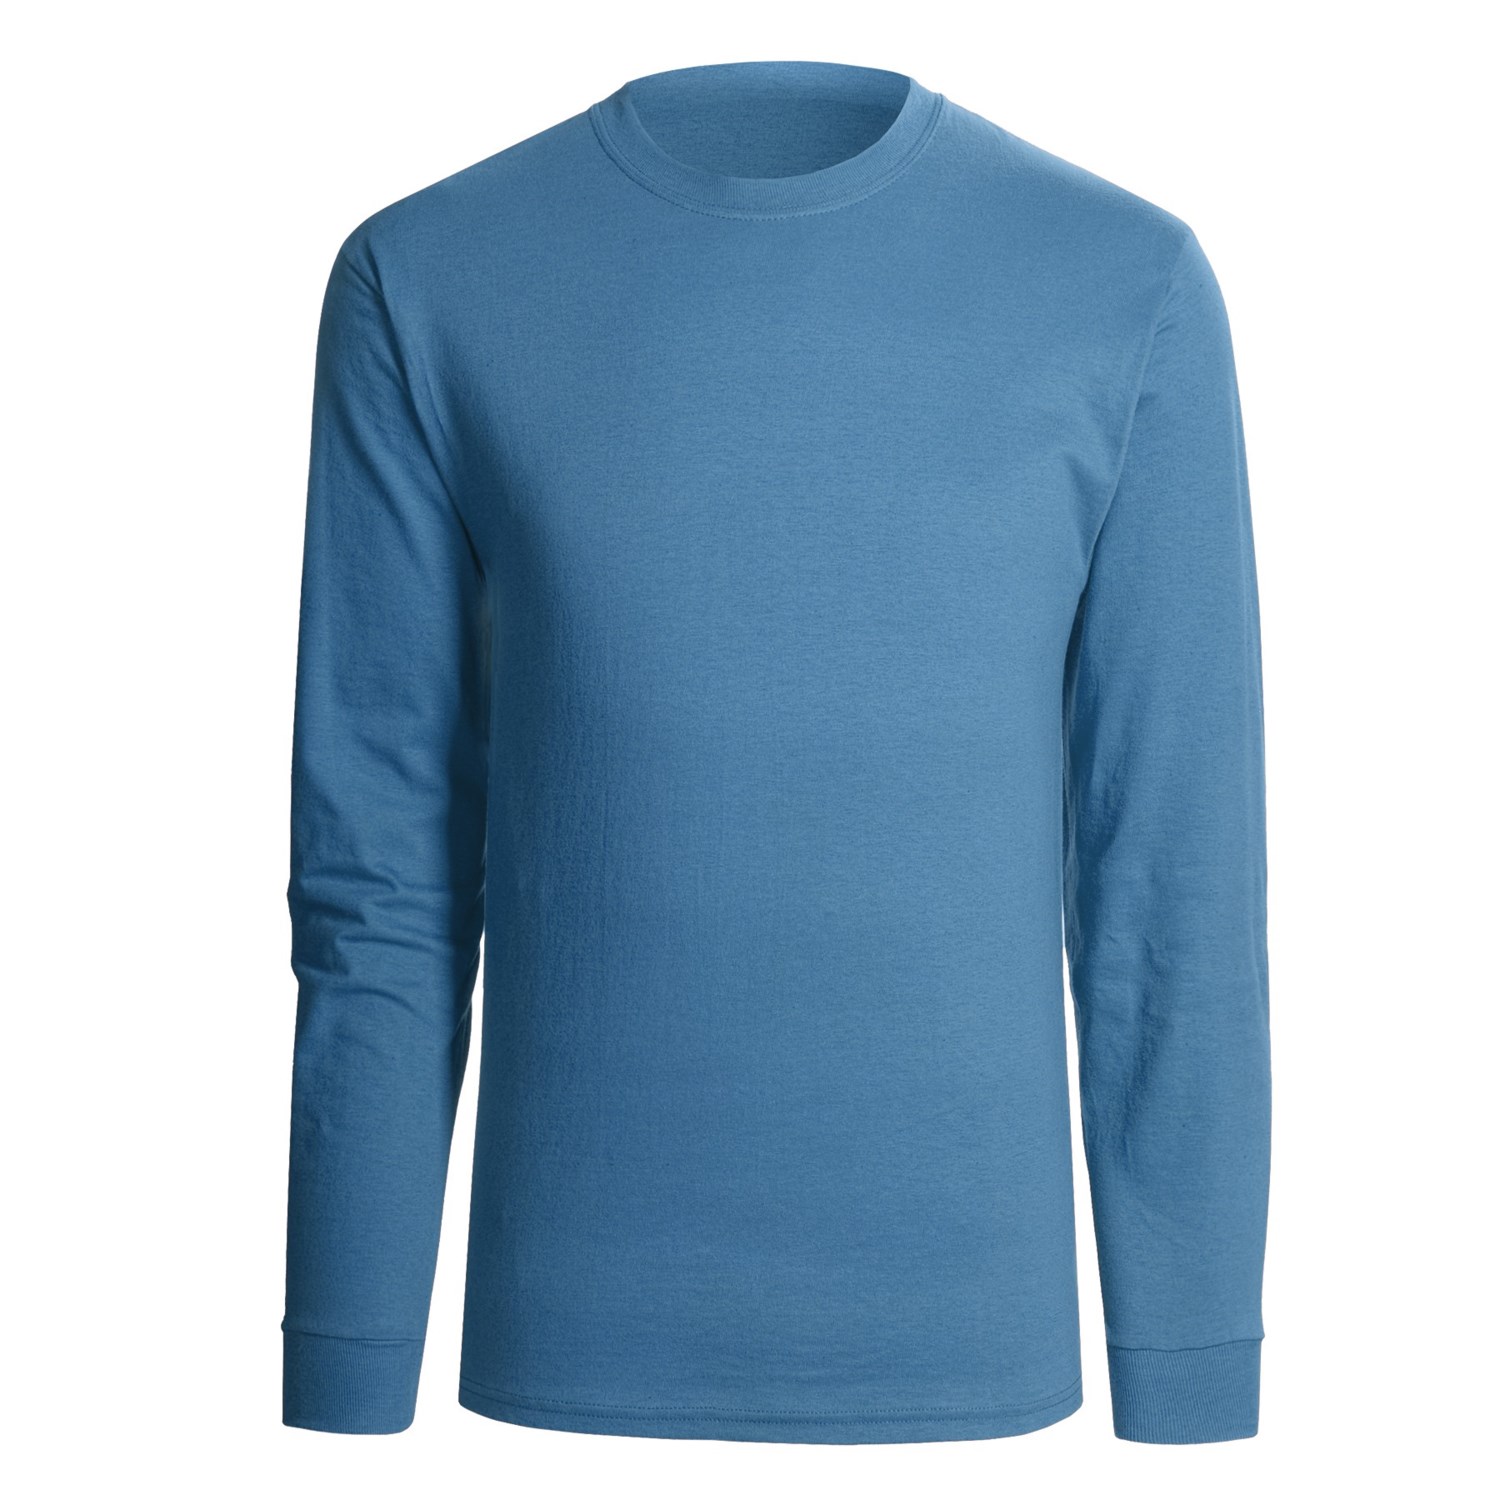 Long sleeve t shirts for women hanes